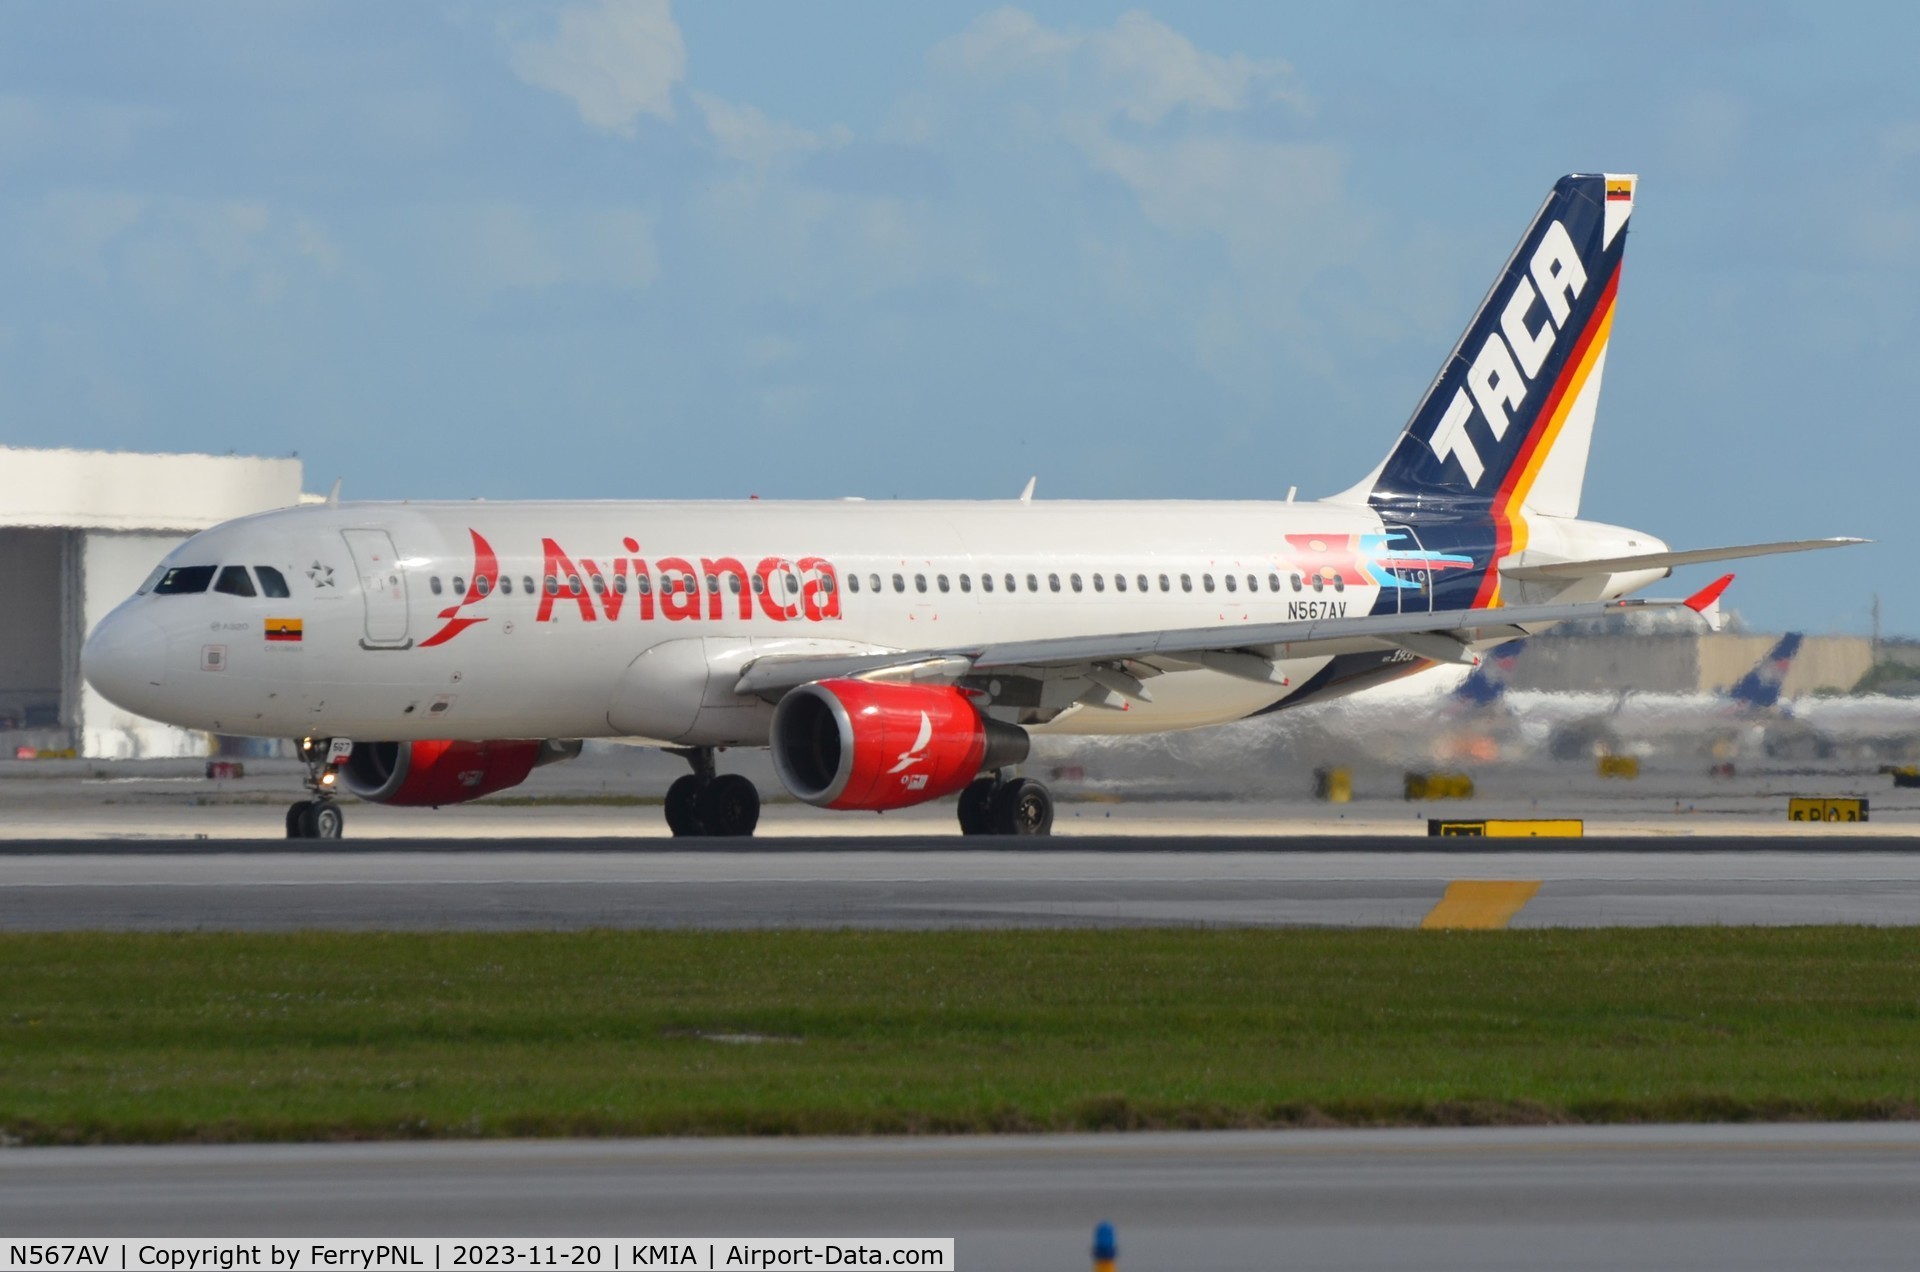 N567AV, 2011 Airbus A320-214 C/N 4567, Avianca A320 with TACA  retro tail for departure